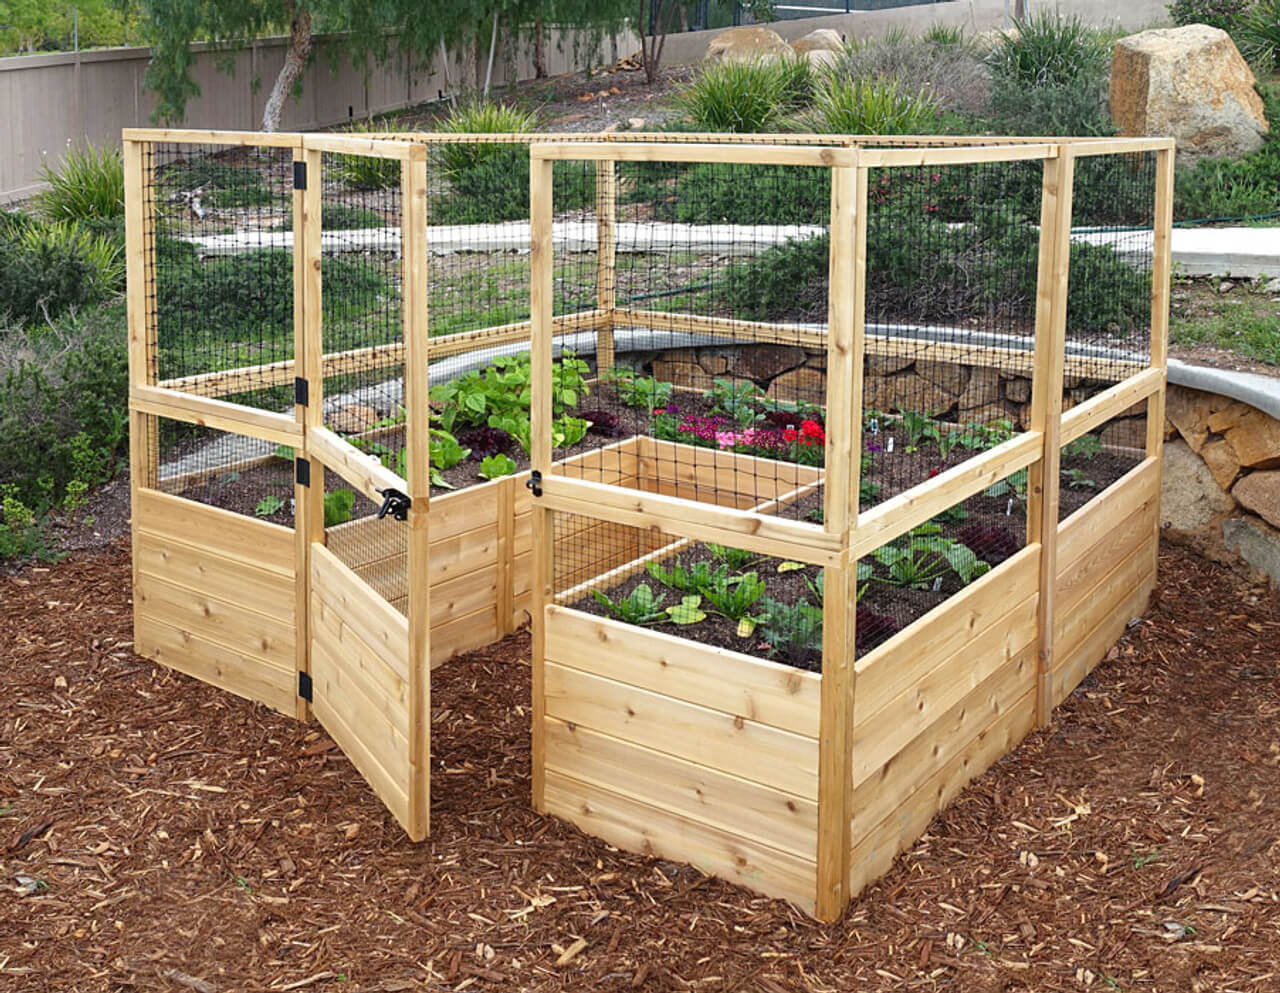 The 20 Best Vegetable Garden Layouts To Try - 147